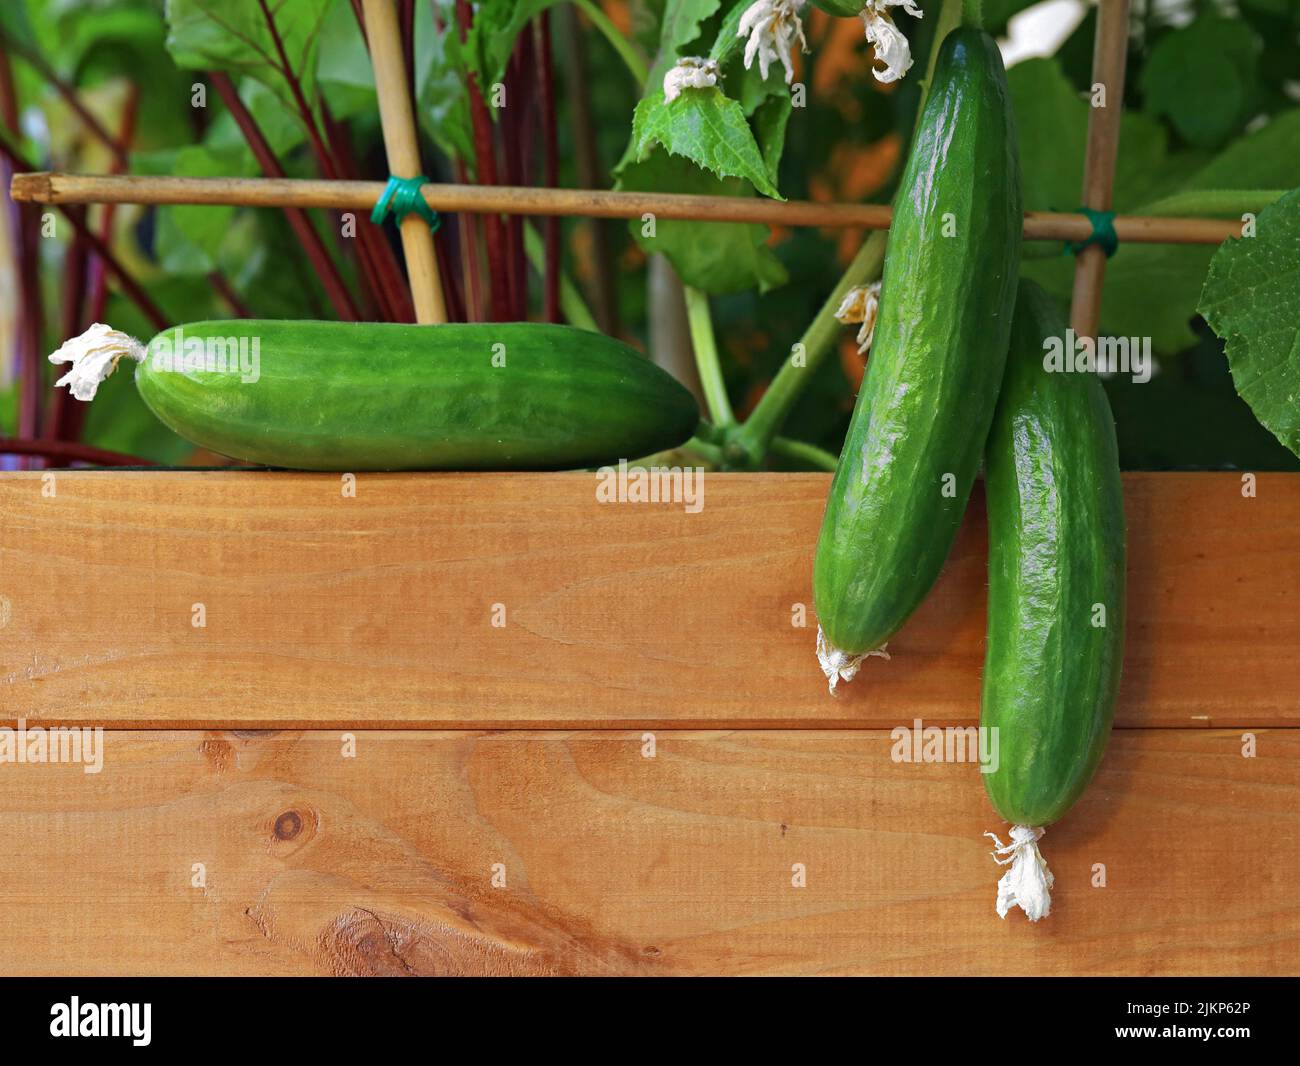 Small cucumbers in a wooden raised bed on balcony Stock Photo